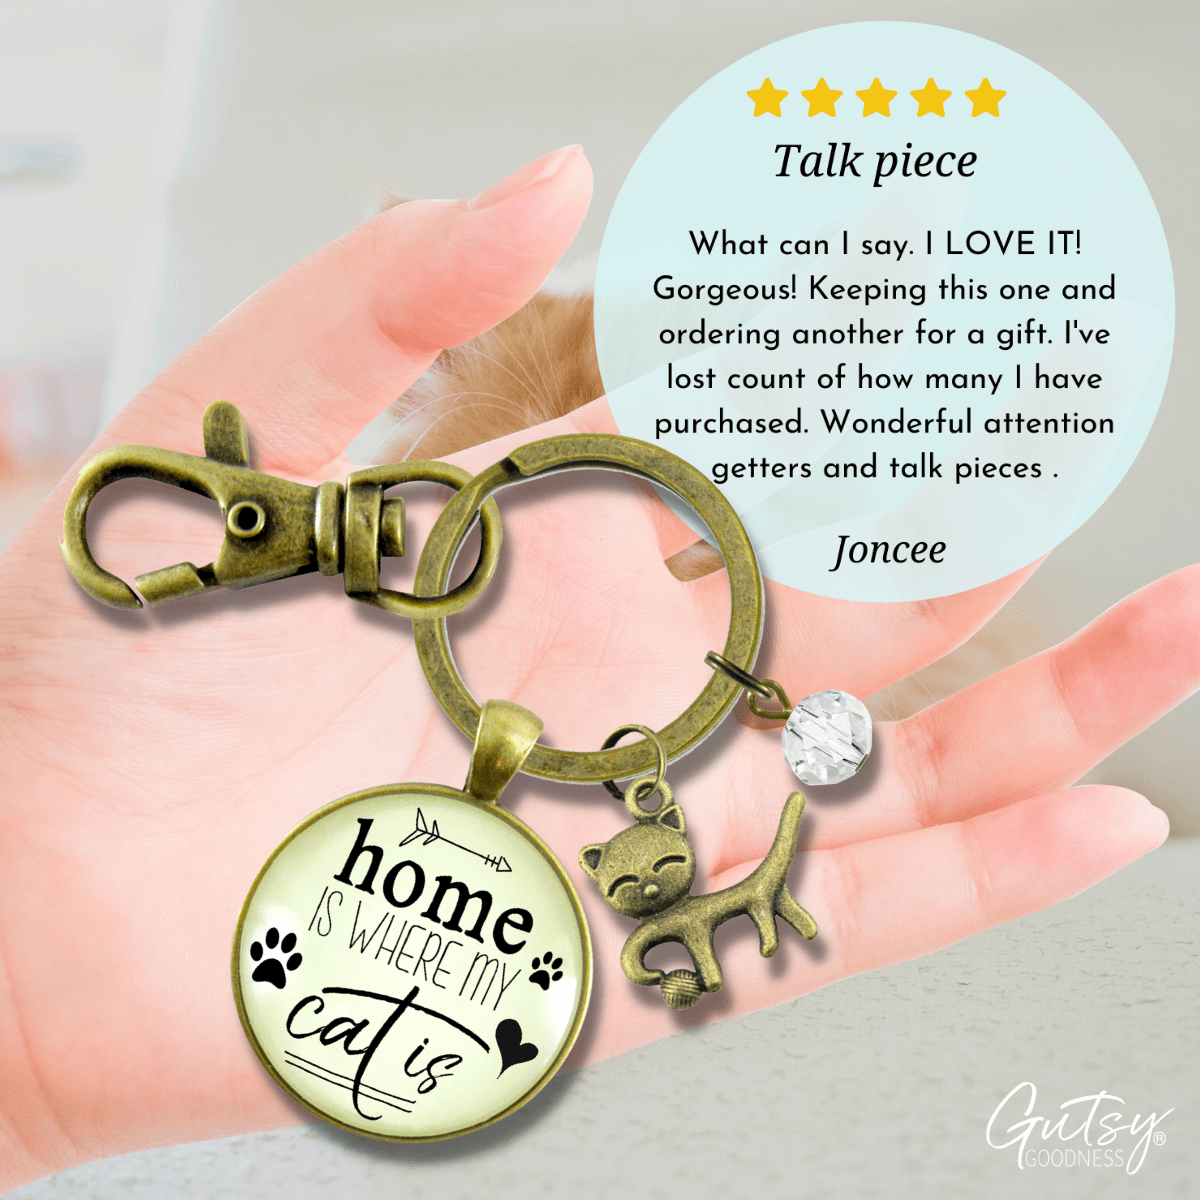 Cat Keychain Home Is Where My Cat Is Gift Quote Kitty Lover Related Feline Jewelry For Women - Gutsy Goodness Handmade Jewelry;Cat Keychain Home Is Where My Cat Is Gift Quote Kitty Lover Related Feline Jewelry For Women - Gutsy Goodness Handmade Jewelry Gifts